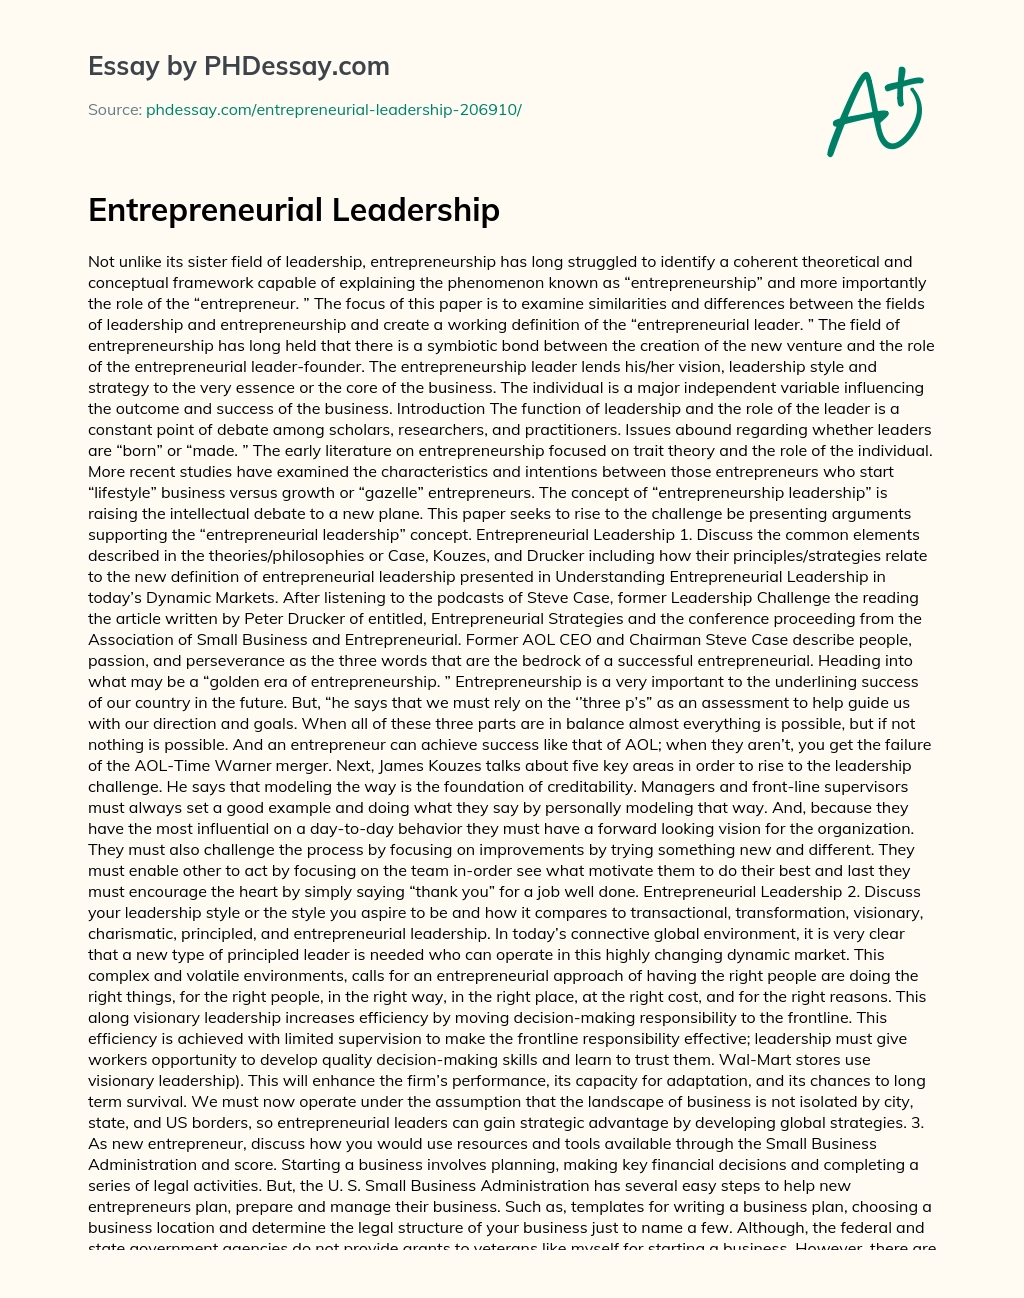 Entrepreneurial and Leadership: Similarities and Differences essay